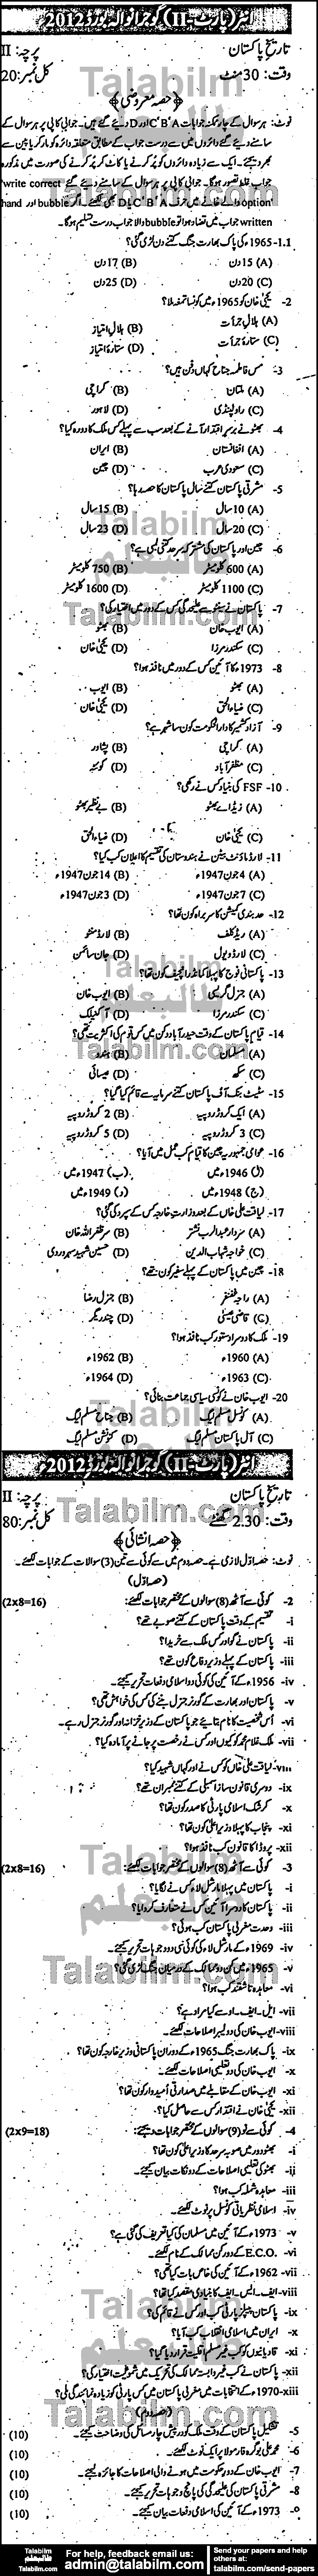 Pakistan History 0 past paper for Group-I 2012